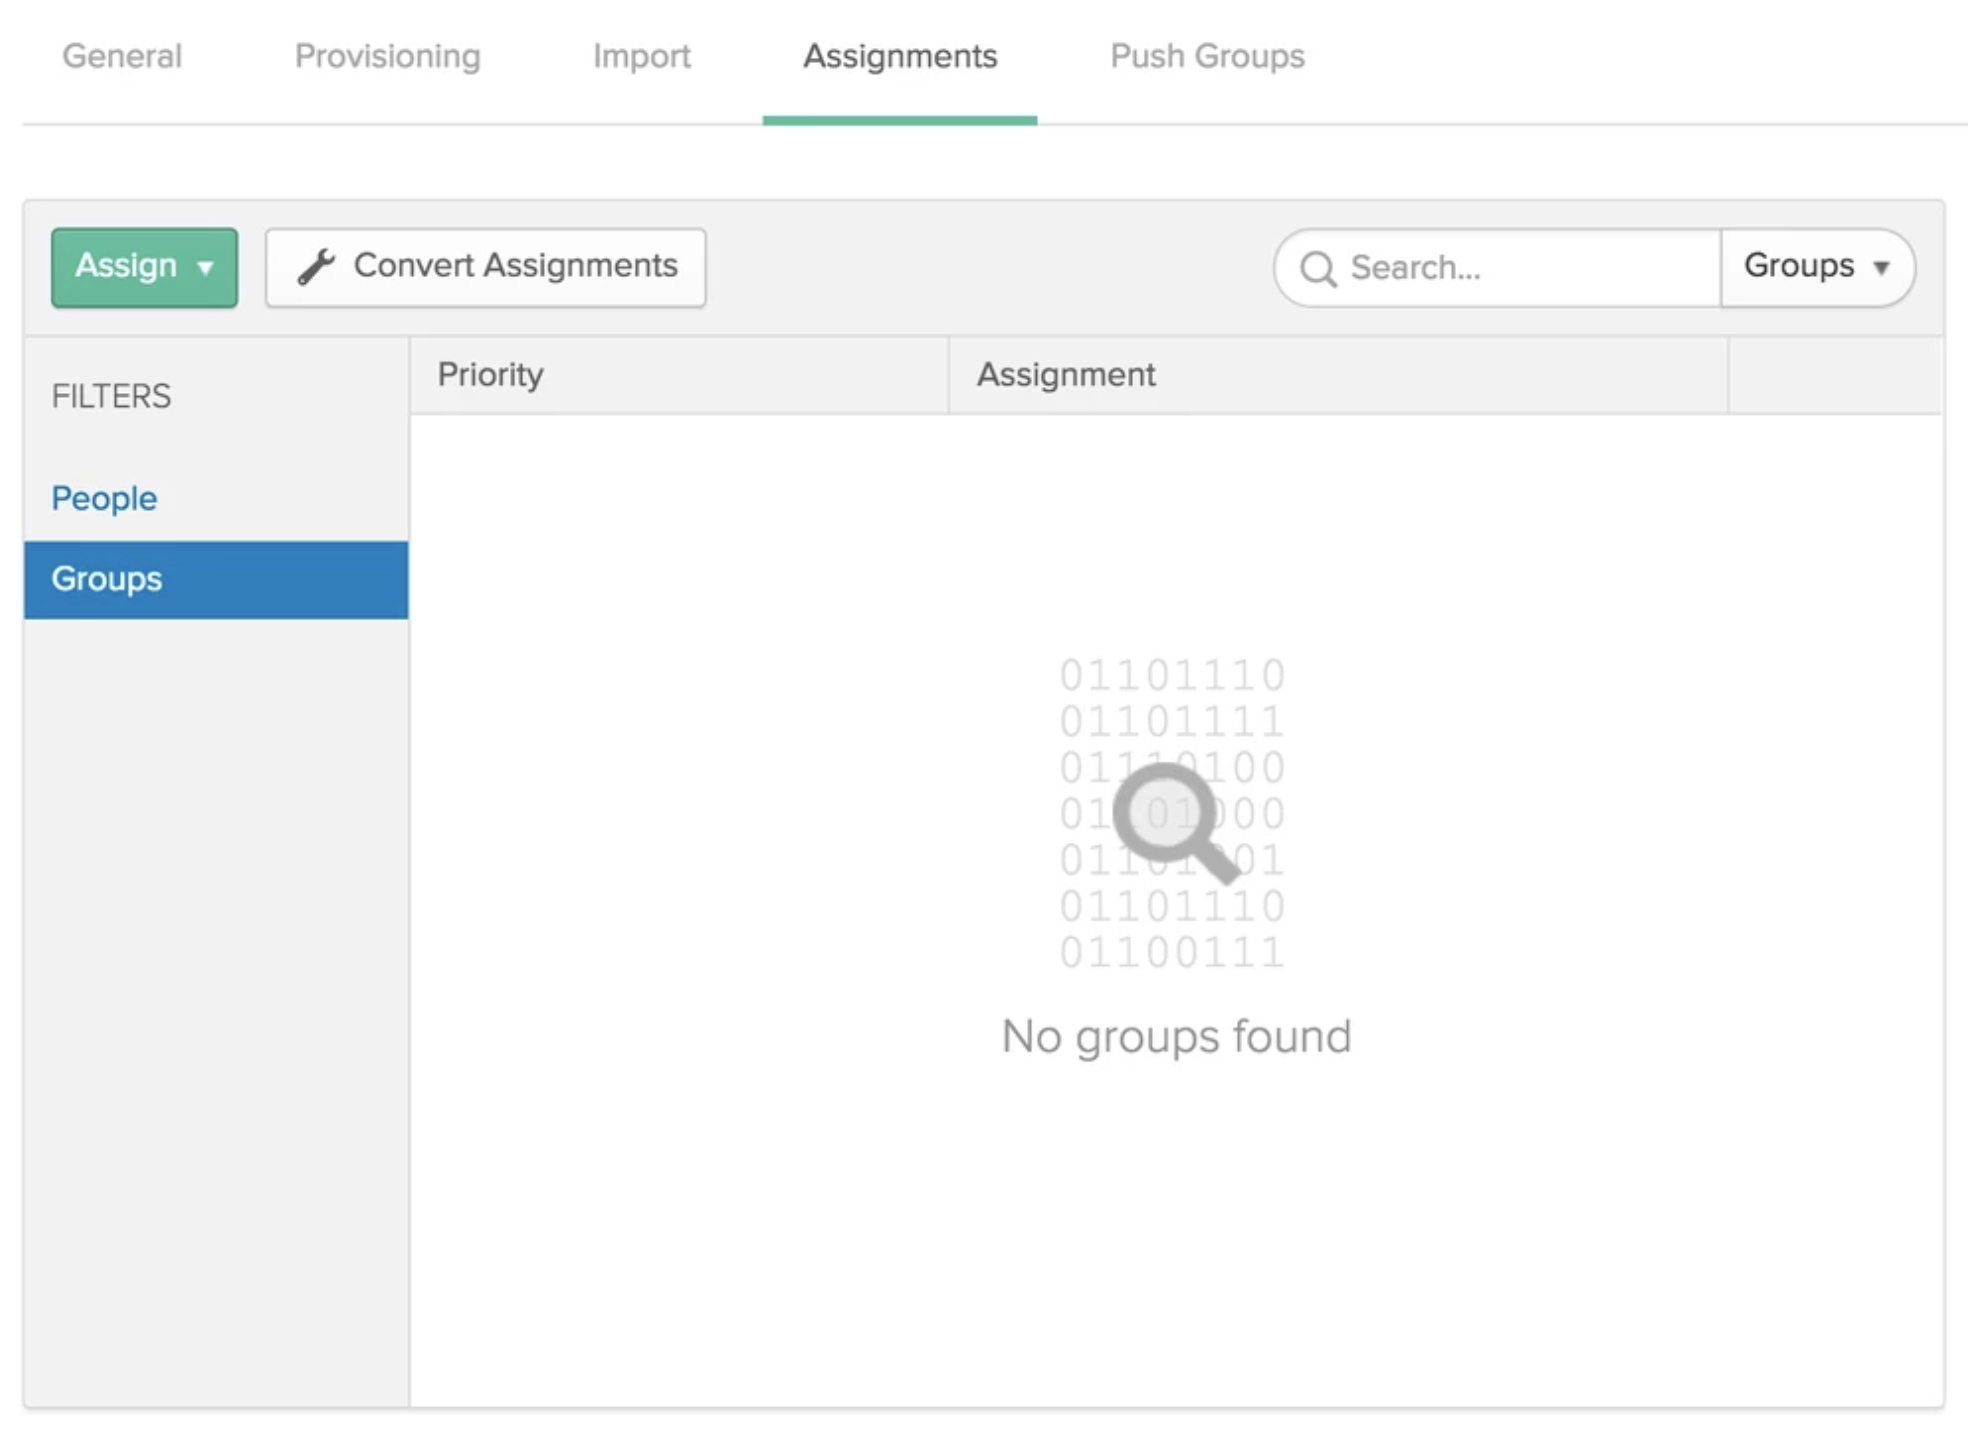 Assignment tab, Assign set to Groups. Empty list of groups, with priority and assignment columns.